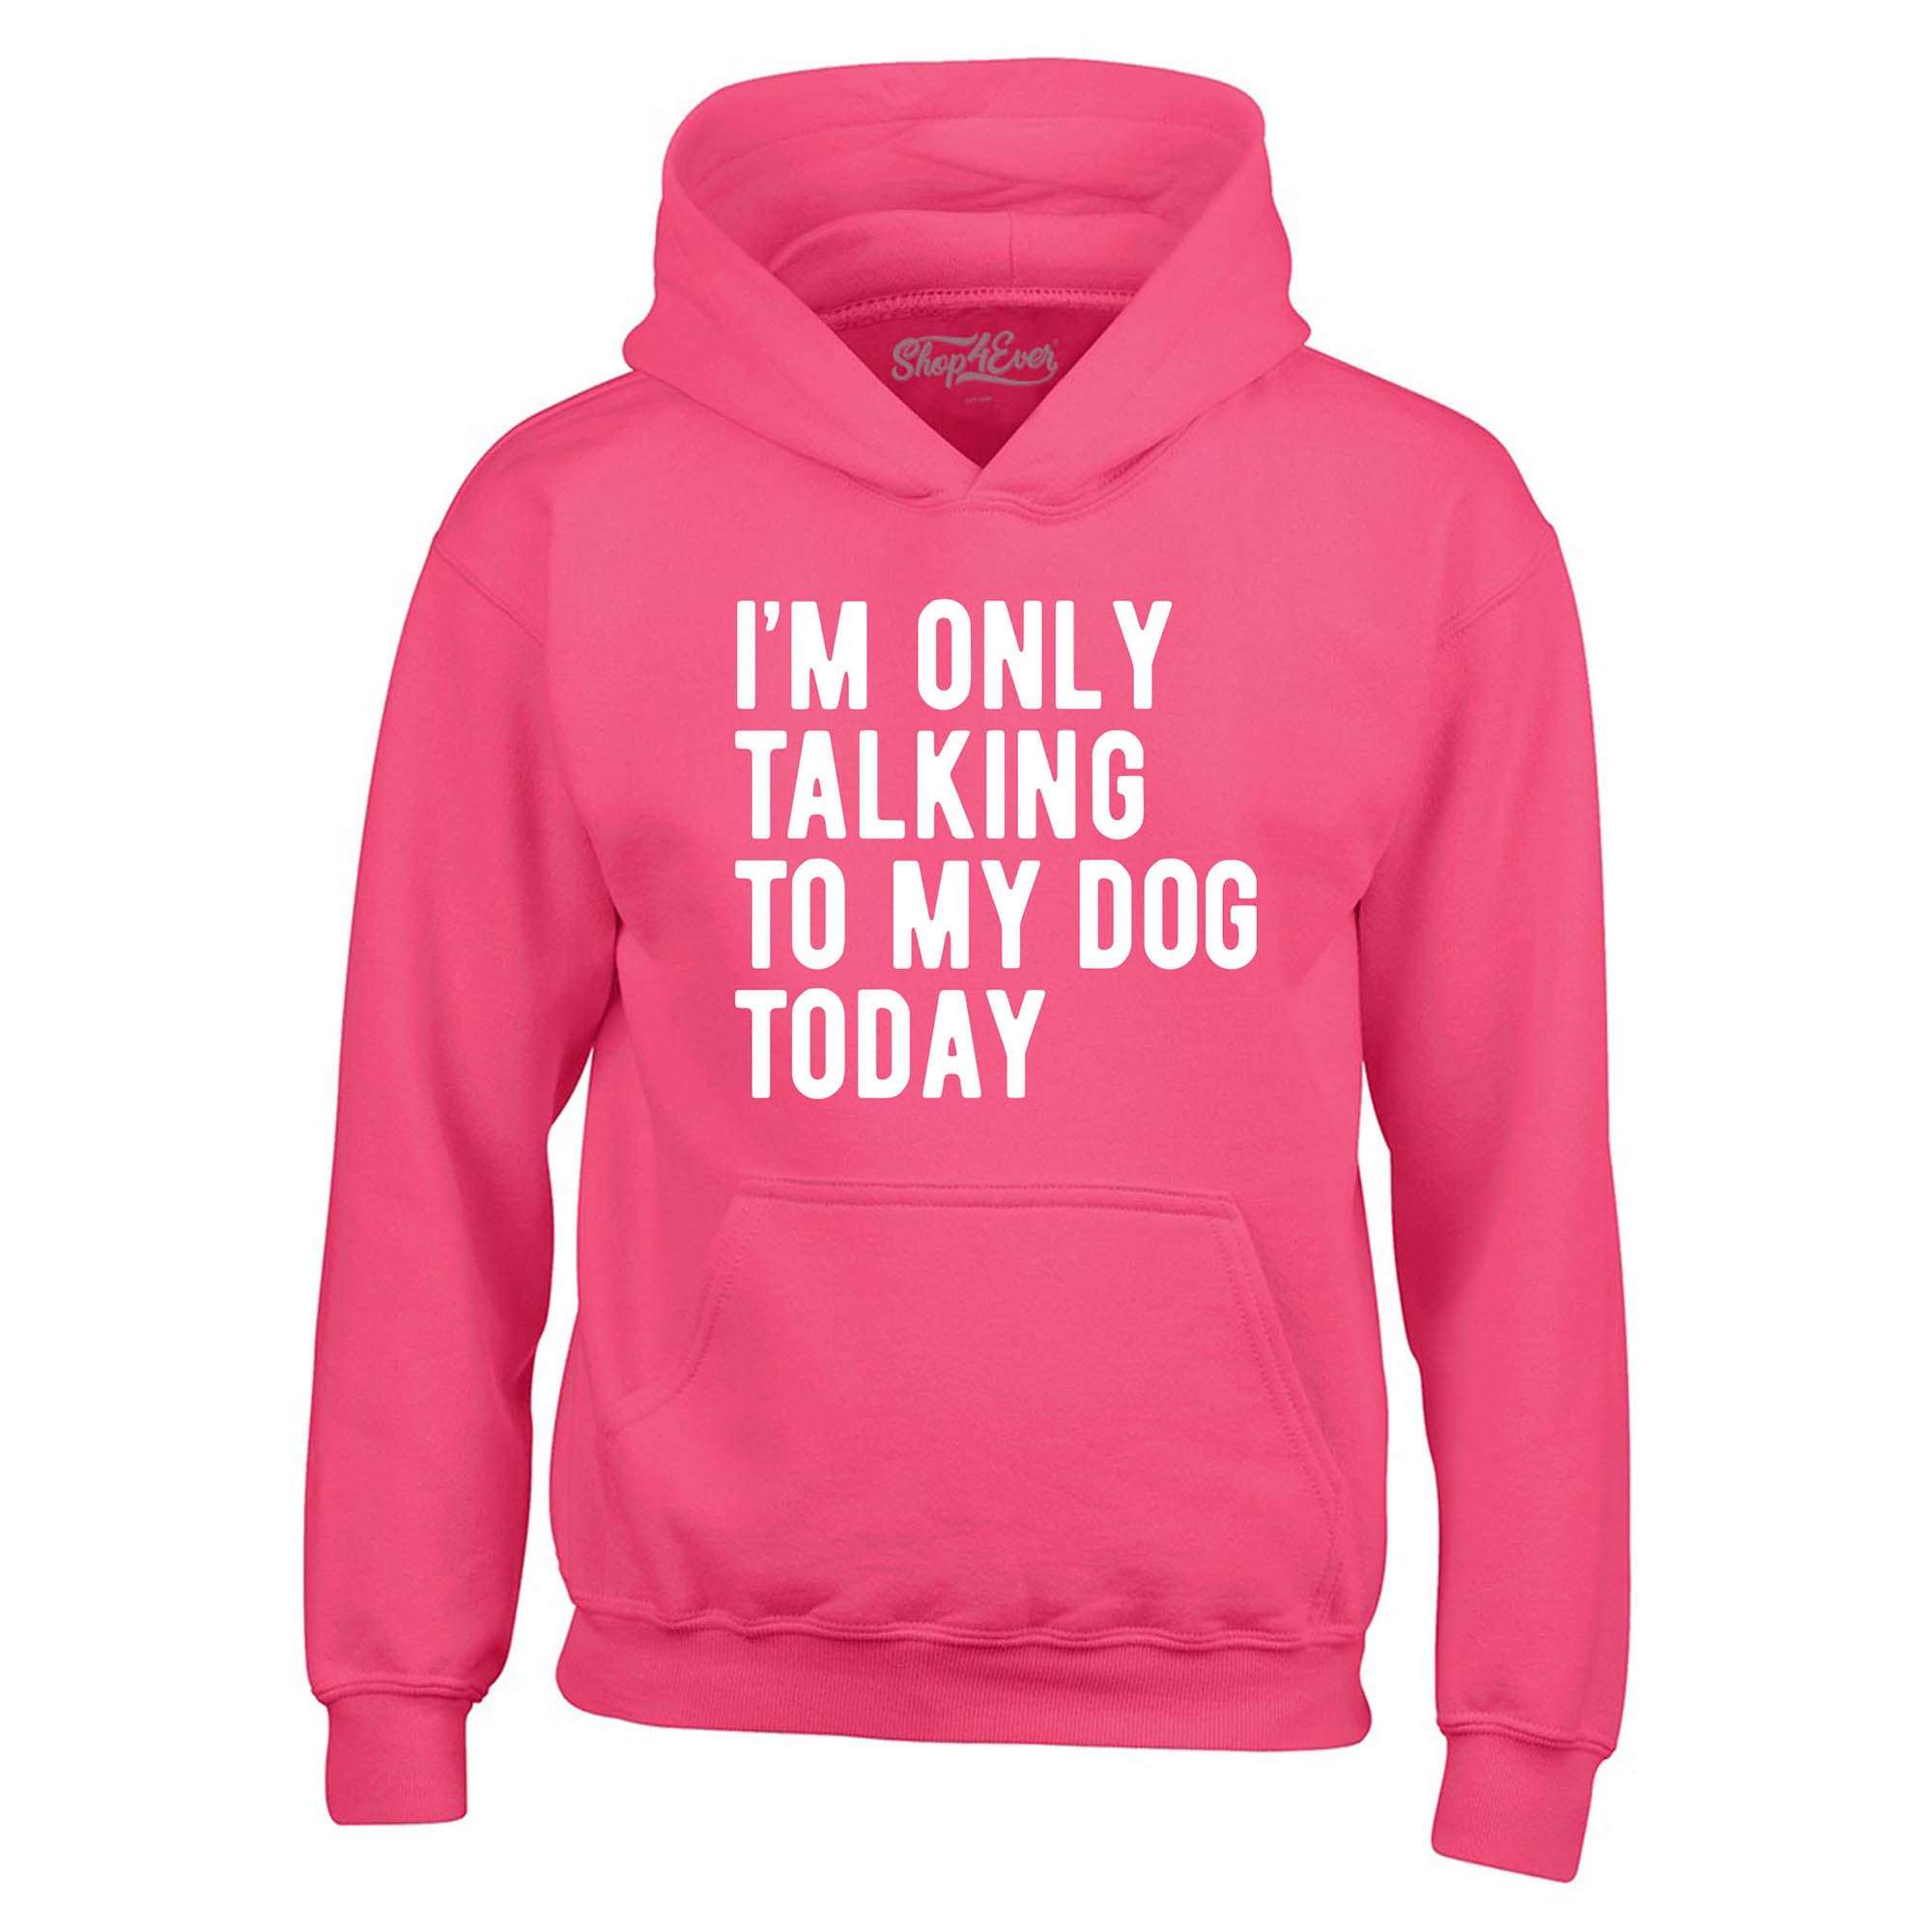 I'm Only Talking to My Dog Today Hoodie Sweatshirts